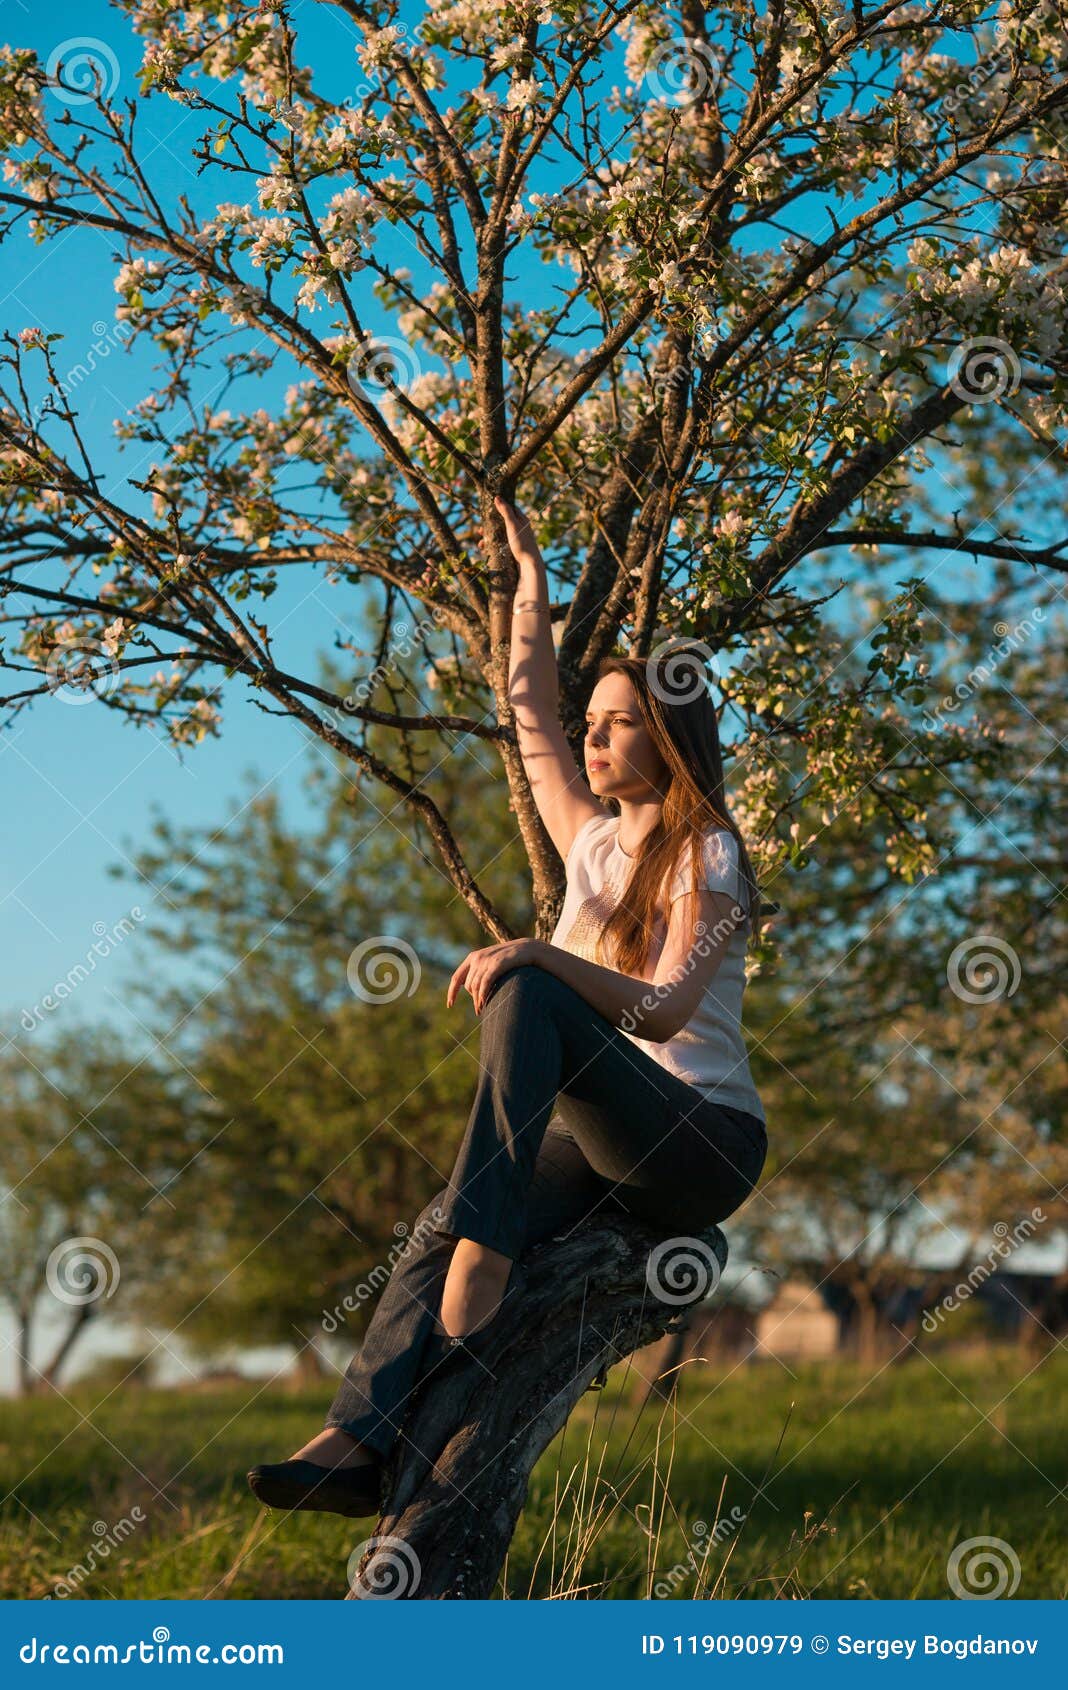 Beautiful Woman In Blossoming Apple Trees Stock Image Image Of Brunette Garden 119090979